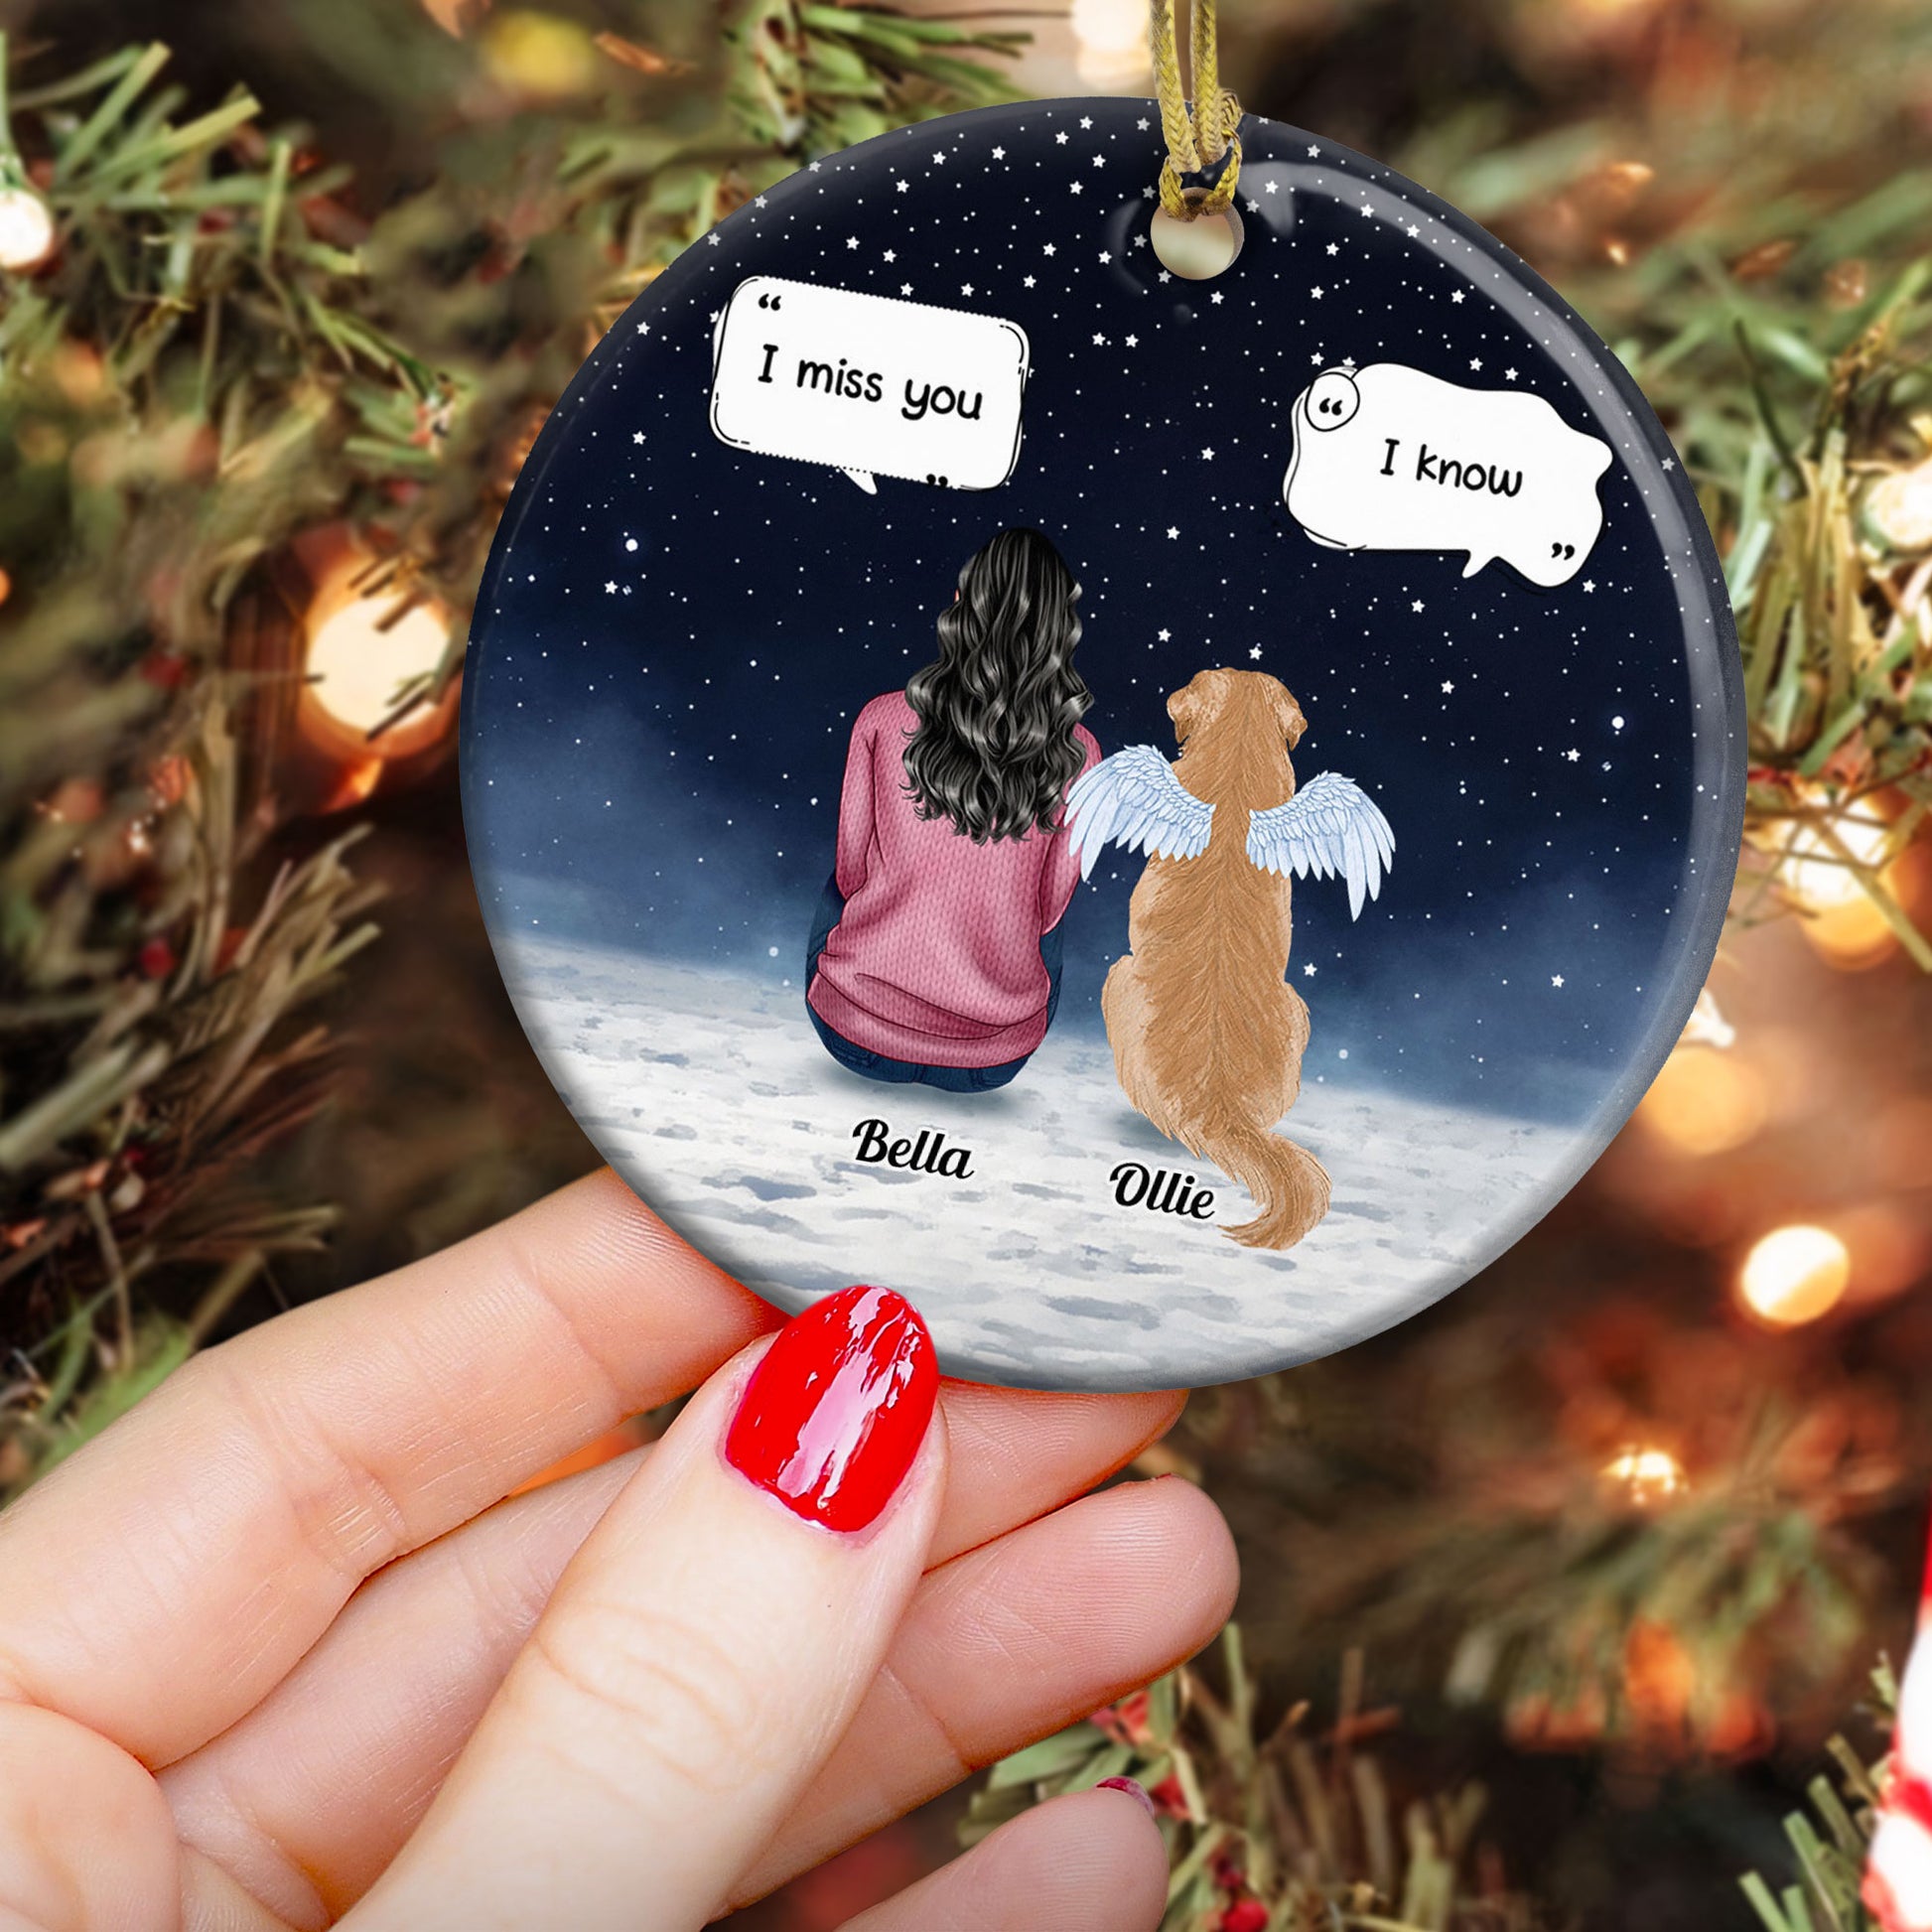 Memorial Pet - Personalized Ceramic Ornament - Christmas, Memorial, Loving Gift For Pet Loss Owners, Dog Mom, Dog Dad, Cat Mom, Cat Lover, Dog Lover